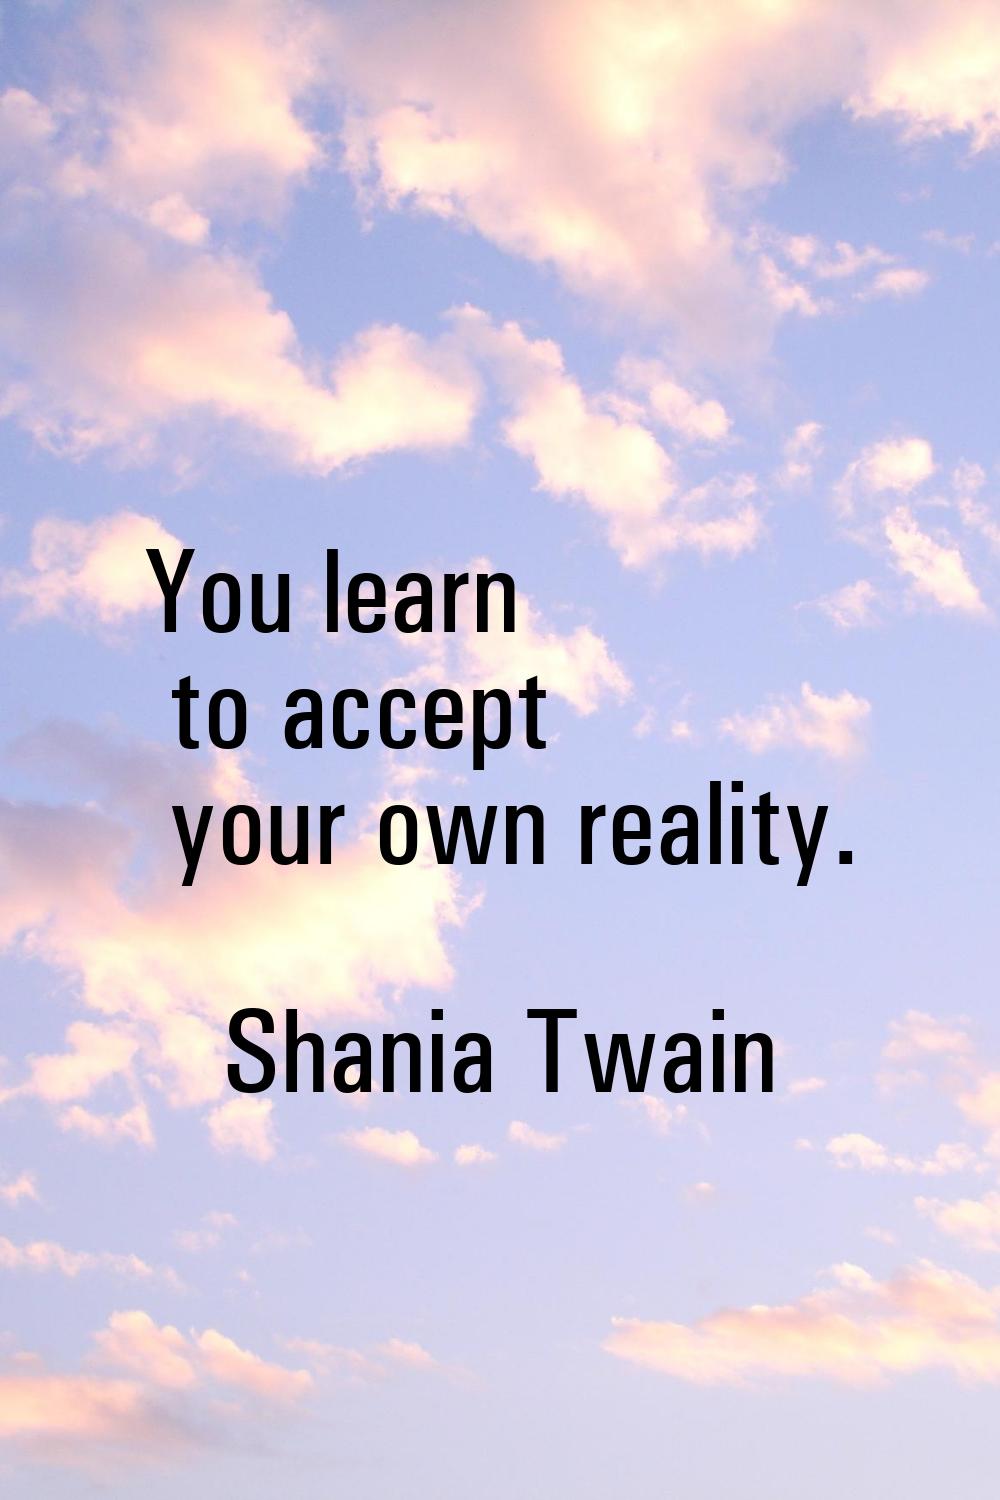 You learn to accept your own reality.